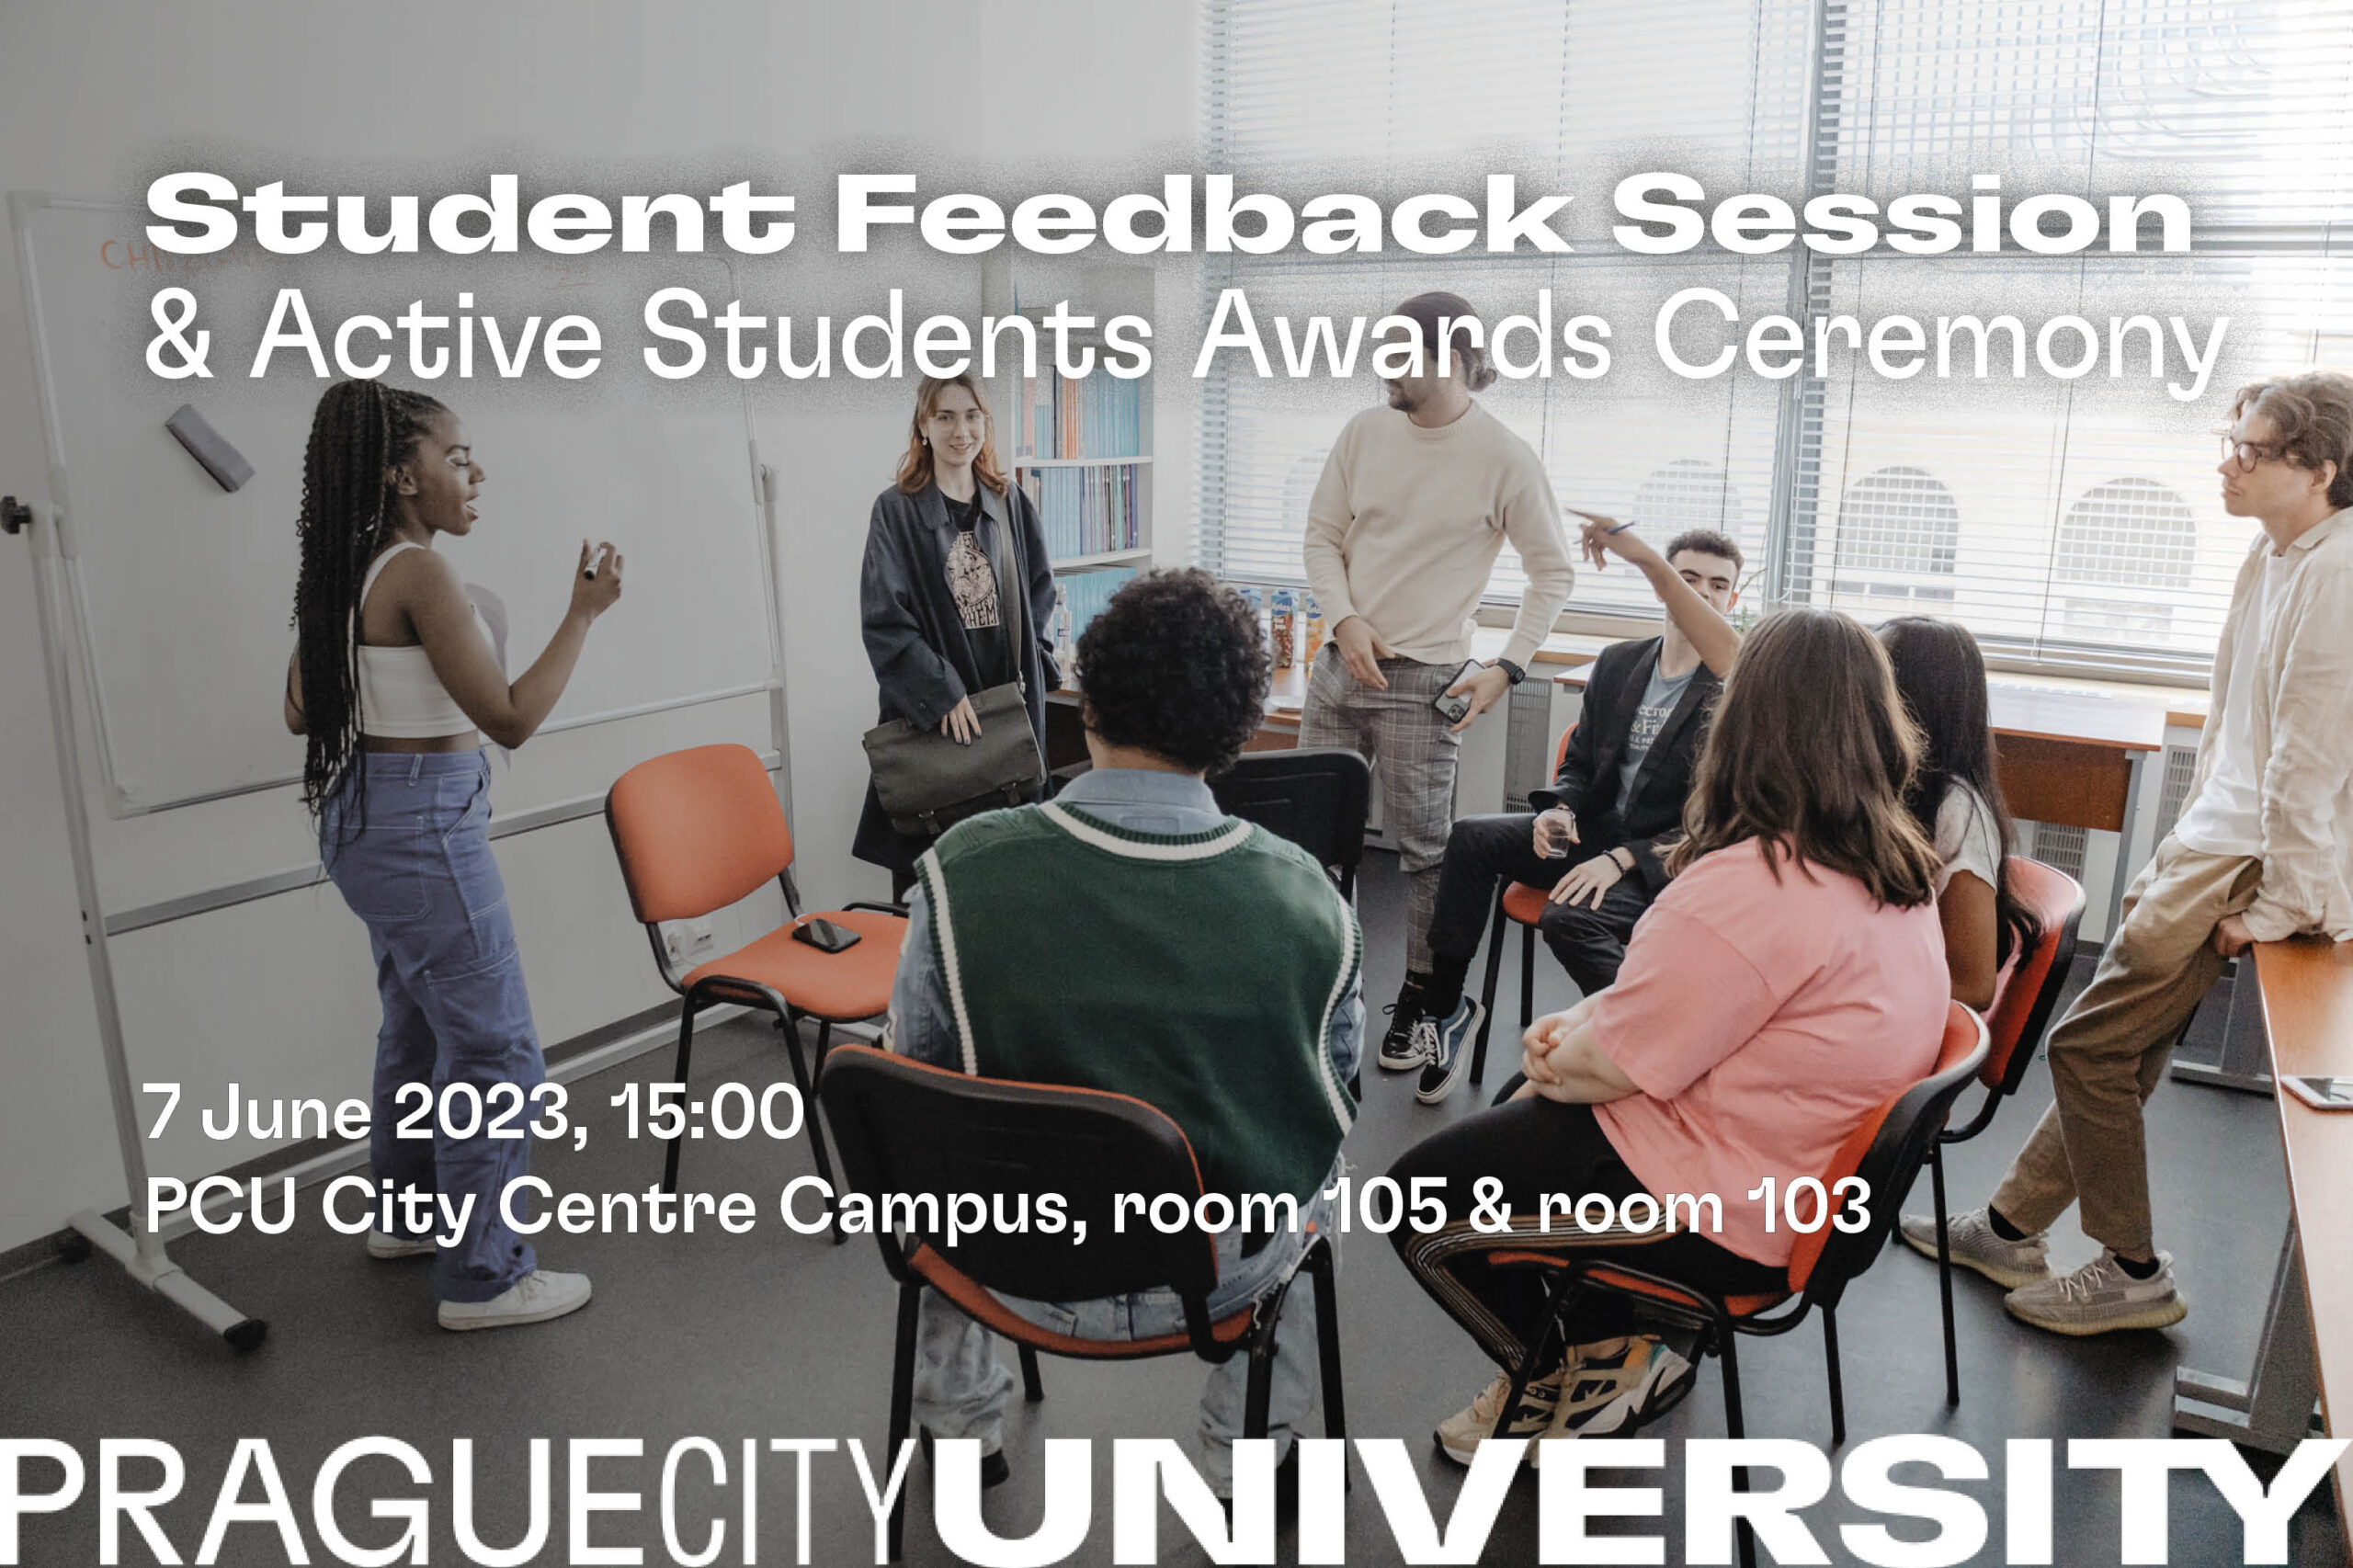 Student Award Session on 7.6.2023 at 15:00